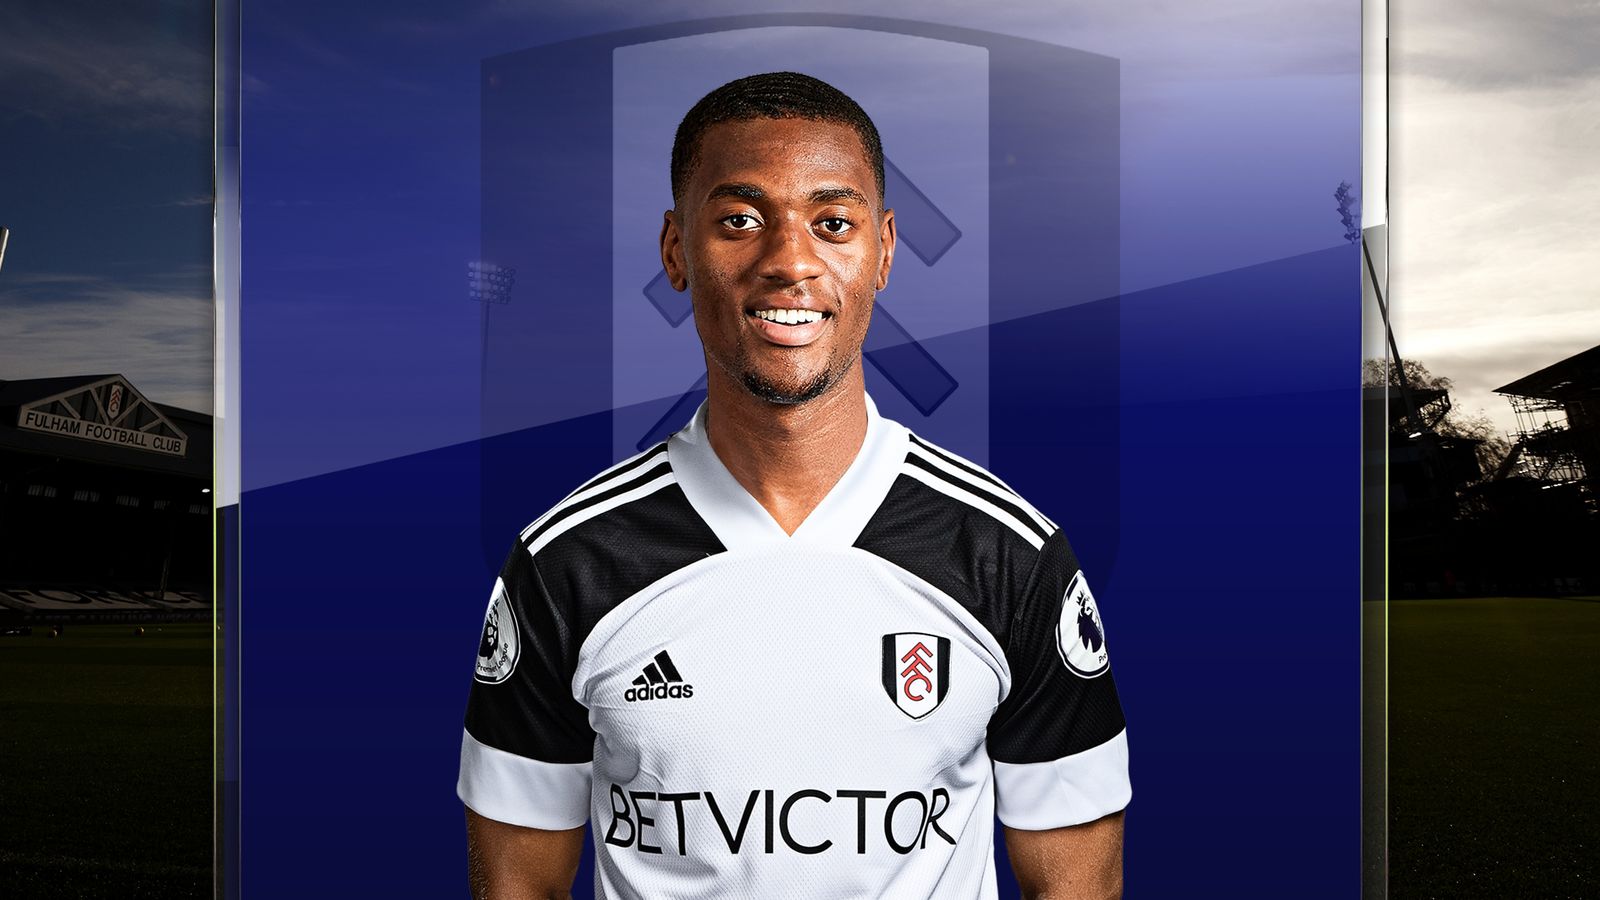  Tosin Adarabioyo is a professional soccer player who plays for Fulham Football Club.